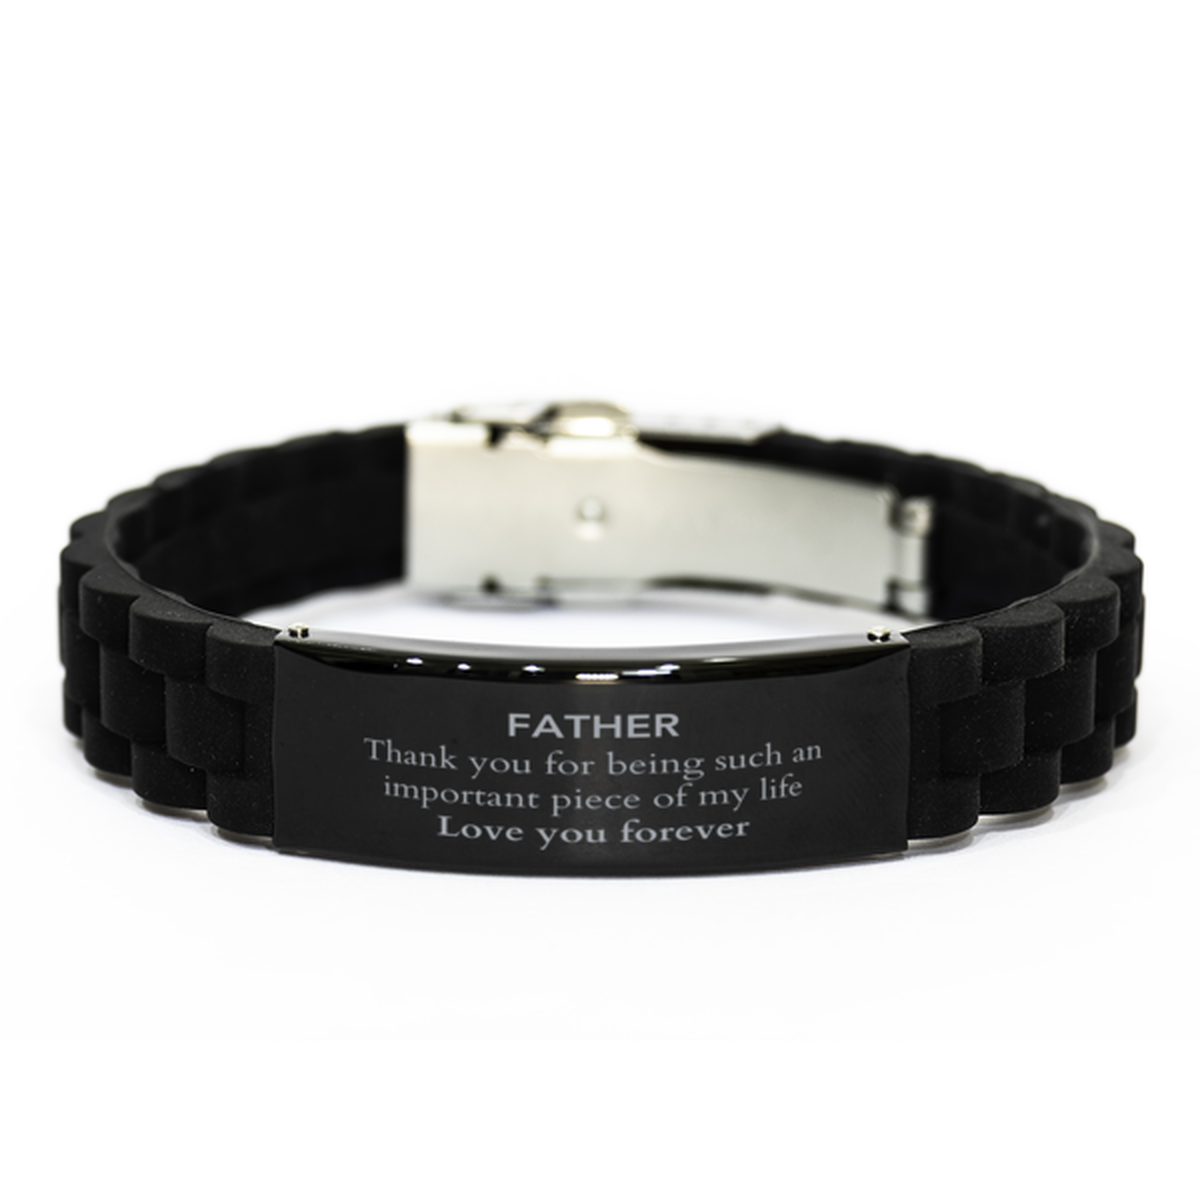 Appropriate Father Black Glidelock Clasp Bracelet Epic Birthday Gifts for Father Thank you for being such an important piece of my life Father Christmas Mothers Fathers Day